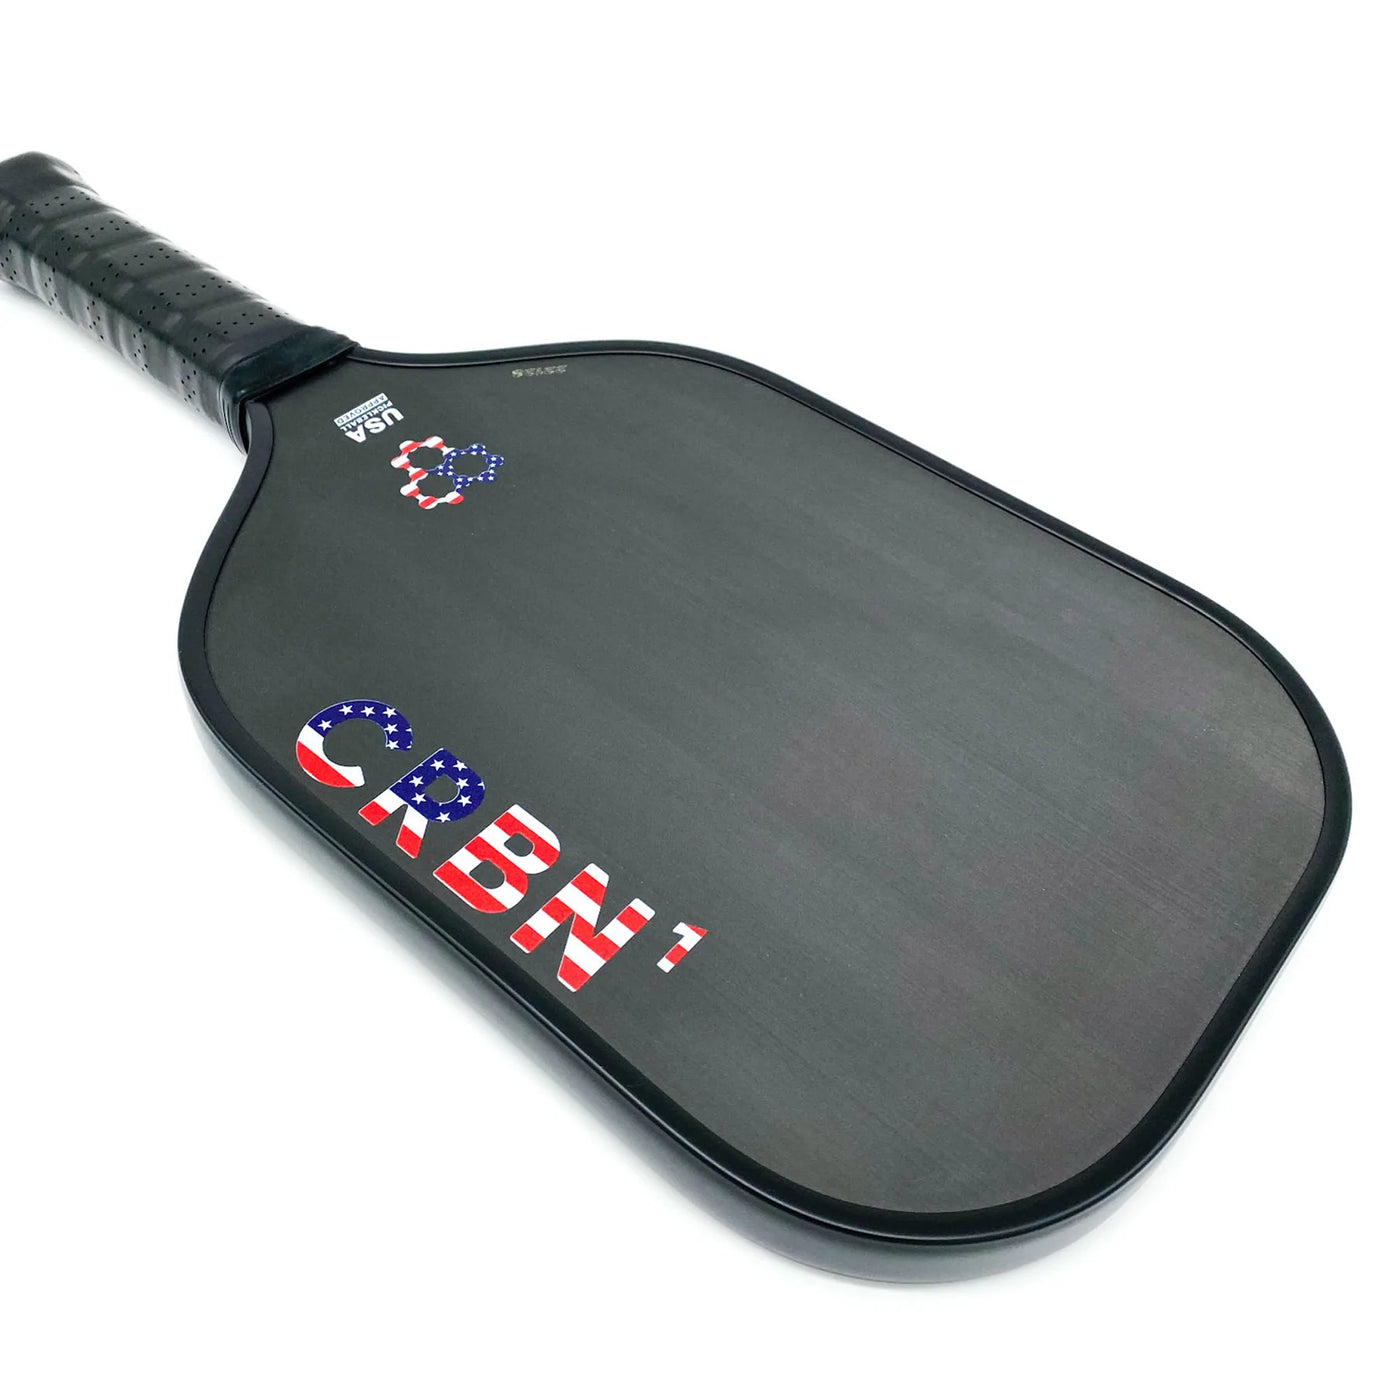 Crbn¹ Limited Edition Patriot